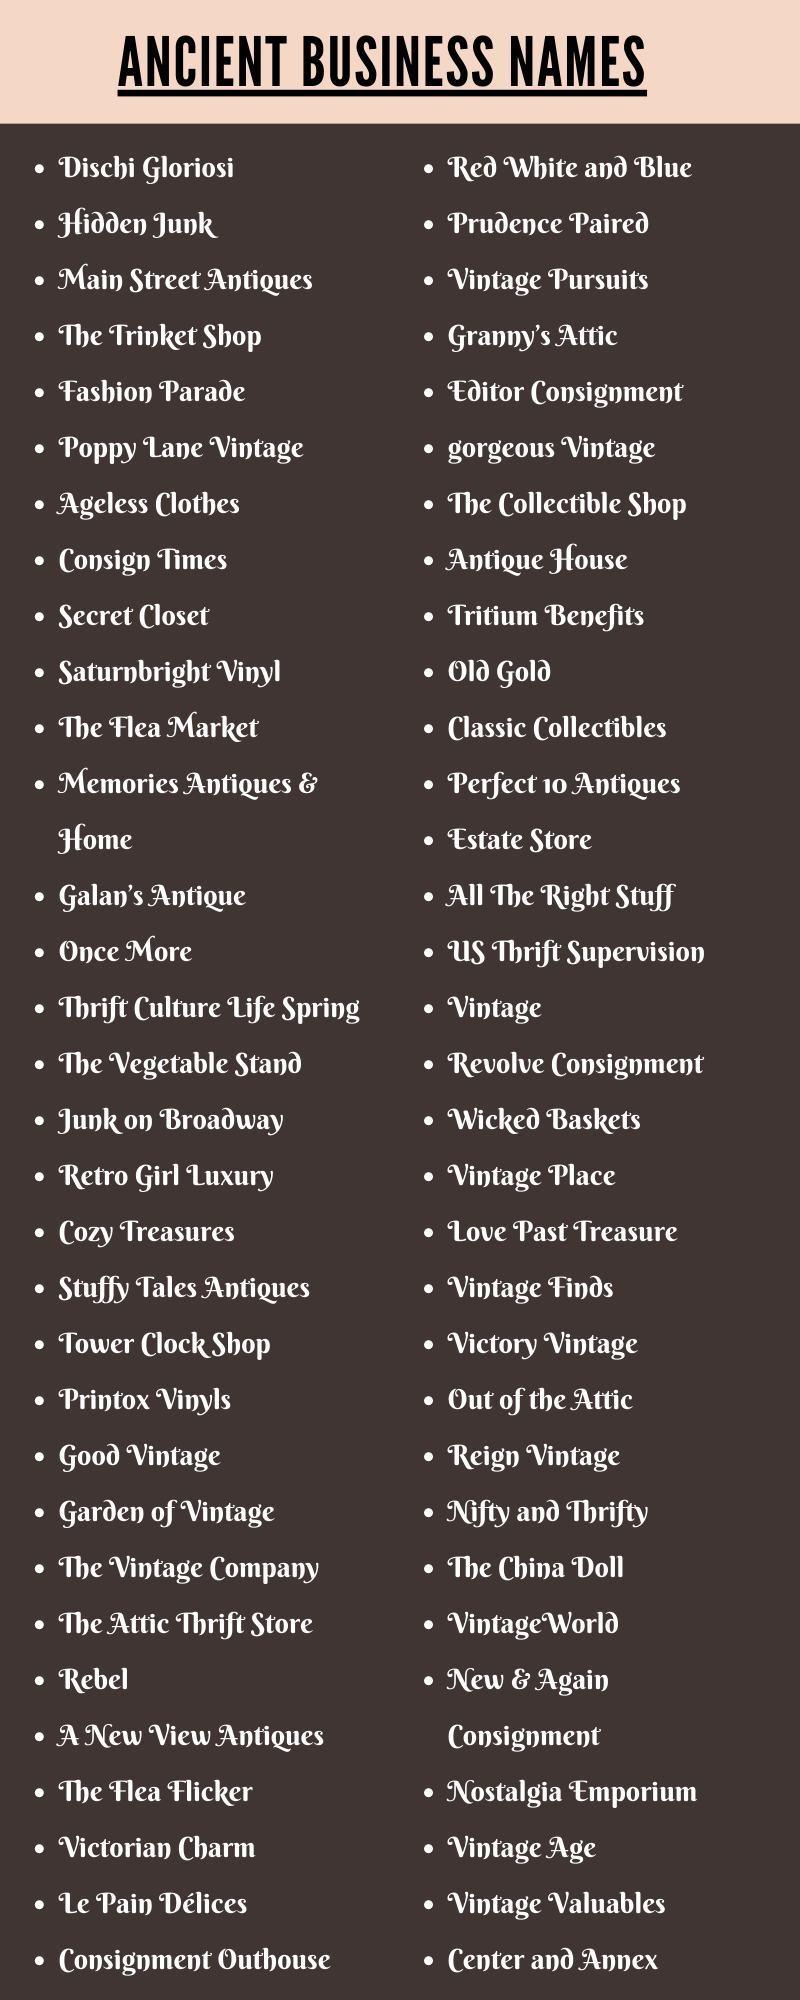 Ancient Business Names